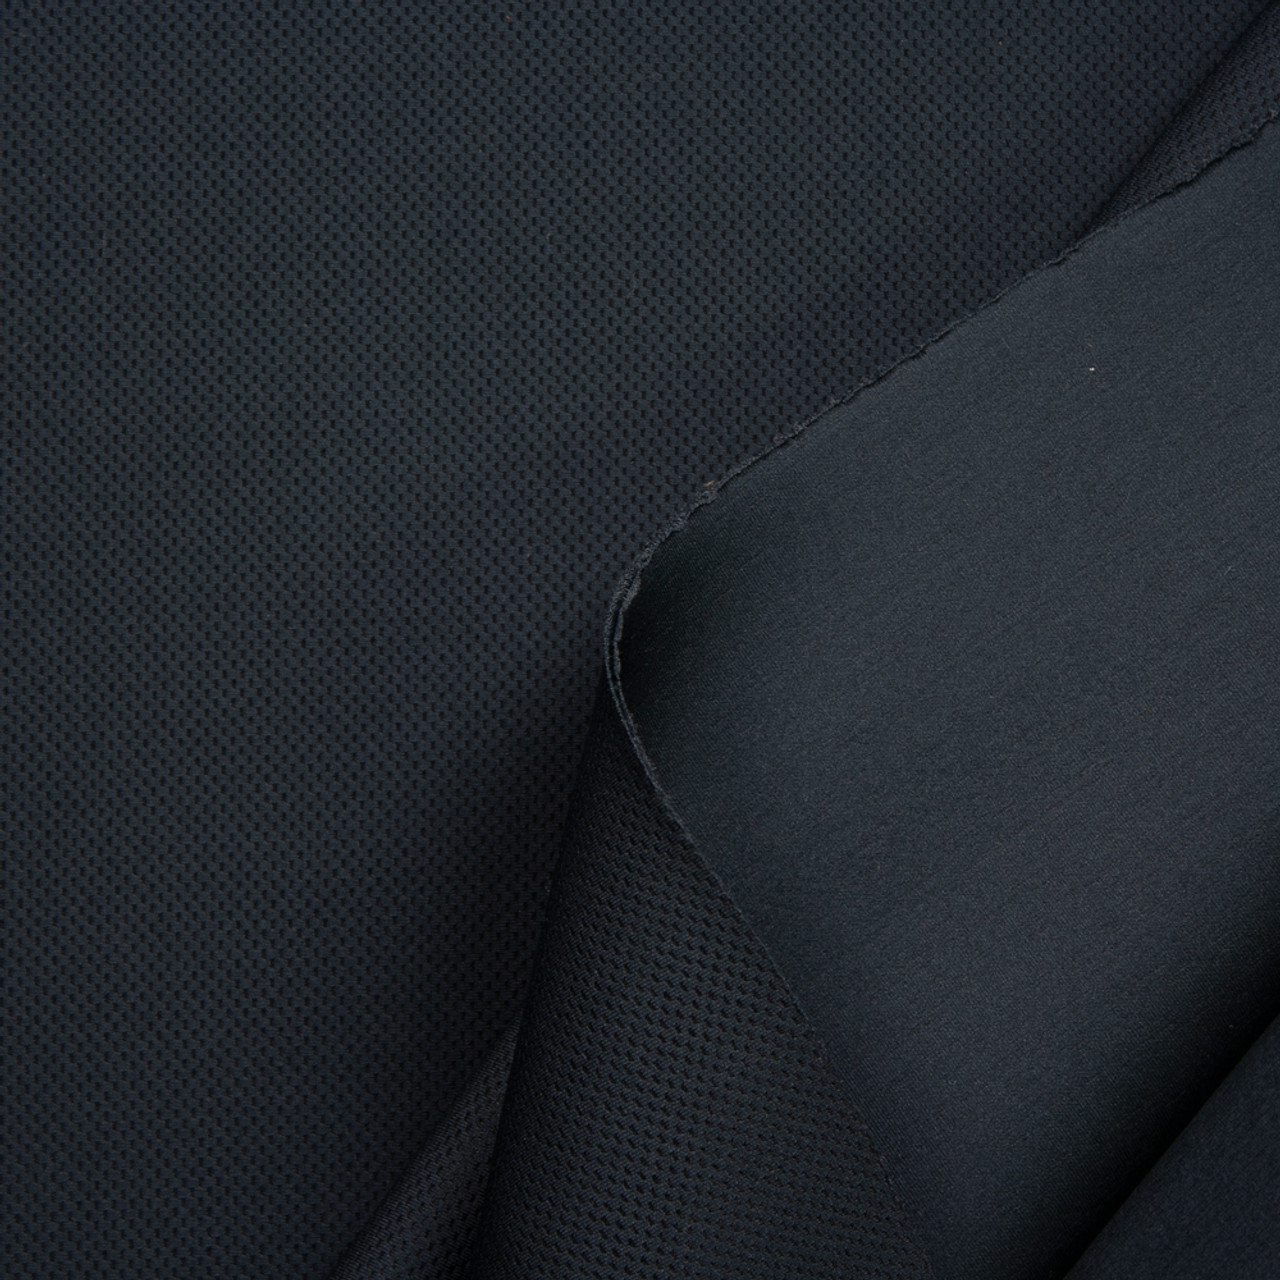 Perforated Stretch – Discovery Fabrics